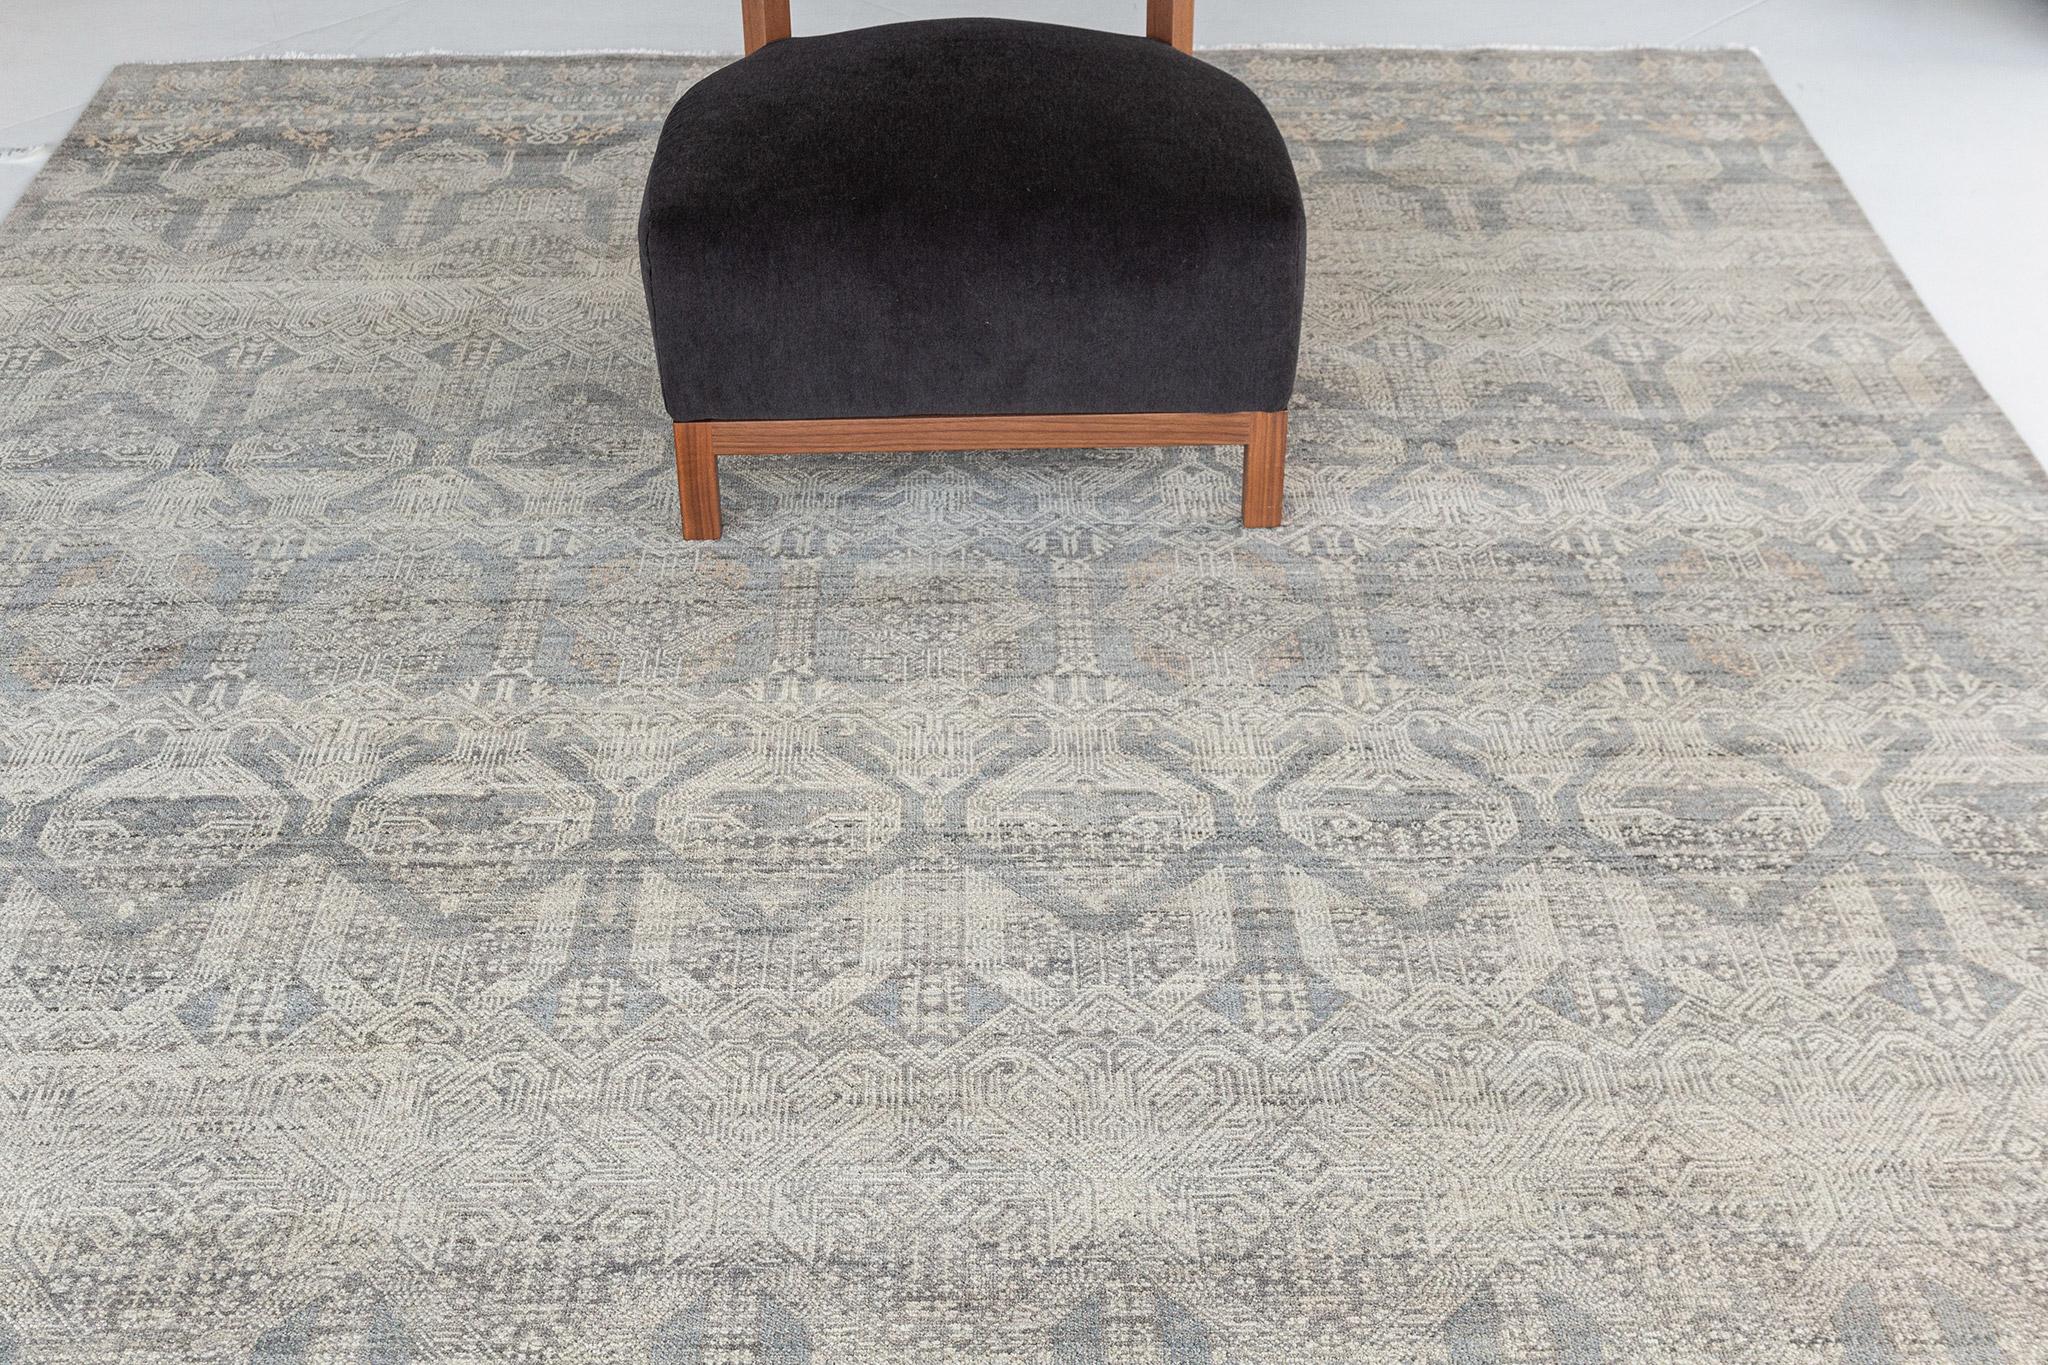 This transitional design rug from the Allure Collection combines style and functionality through these majestic symbols in the gray palette. Beautifully curate your home gallery or accentuate open space, this modern and classic design is an instant